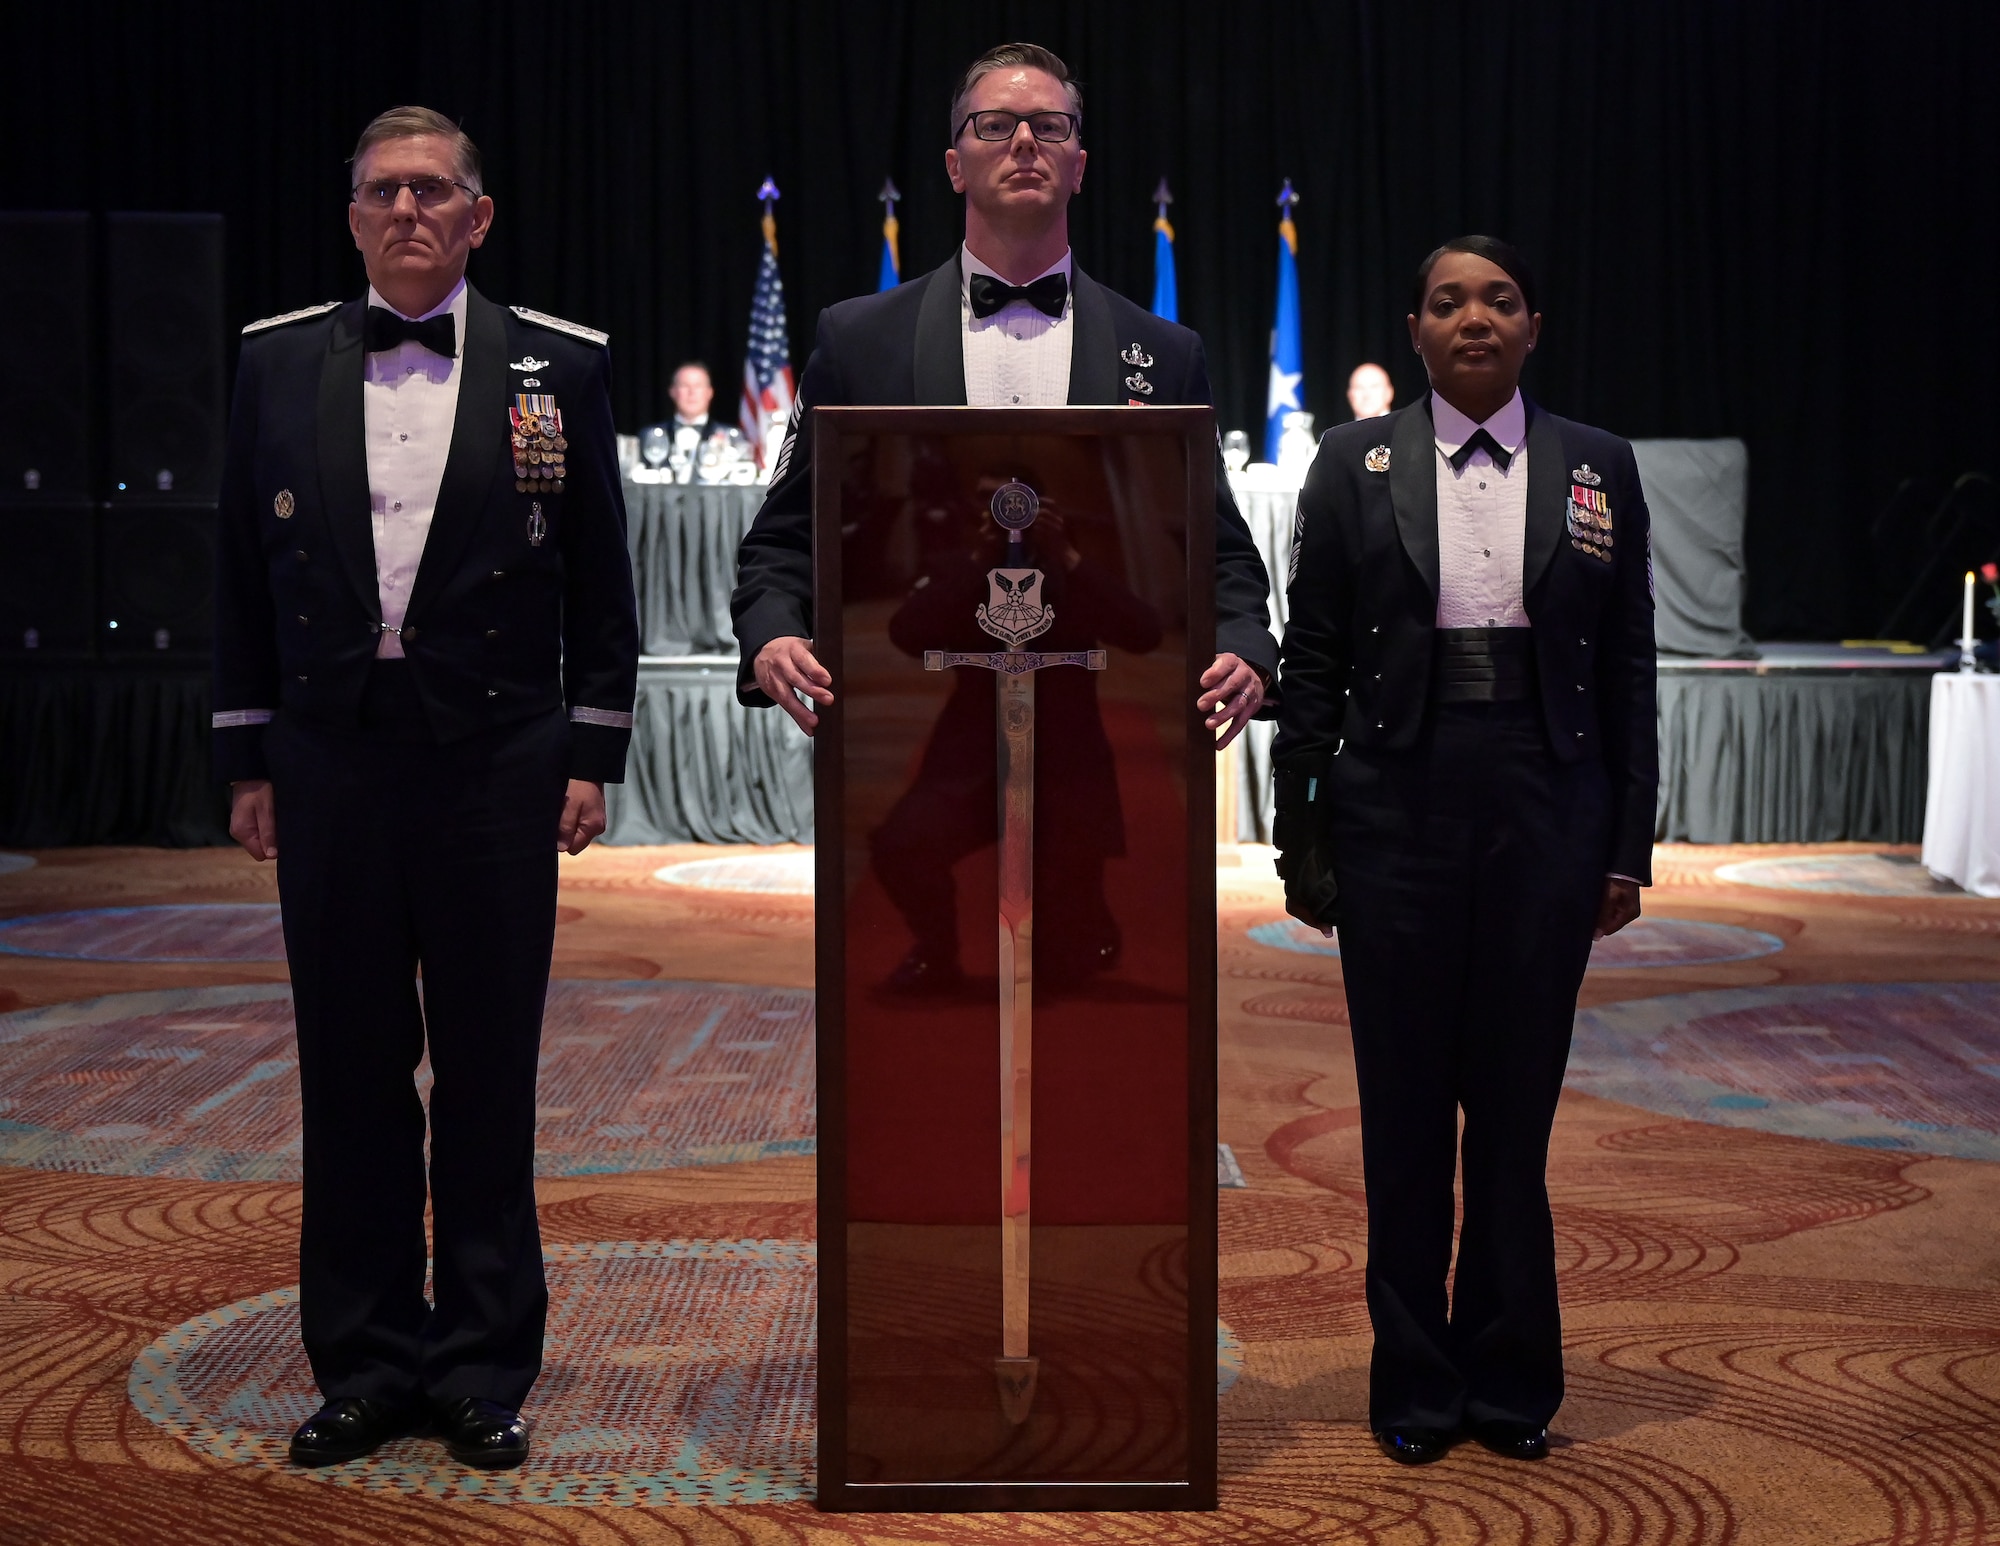 Chief Master Sgt. Melvina Smith, Air Force Global Strike Command command chief, presents the Order of the Sword to Retired Gen. Timothy M. Ray, former AFGSC commander, during his Order of the Sword ceremony at Sam’s Hotel and Casino, Shreveport, Louisiana, May 11, 2022. The ceremonial presentation was adopted from the Royal Order of the Sword and passed to the United States during the Revolutionary War. However, it lay dormant until it was reinstituted in its current form in 1967.  (U.S. Air Force photo by Senior Airman Jonathan E. Ramos)